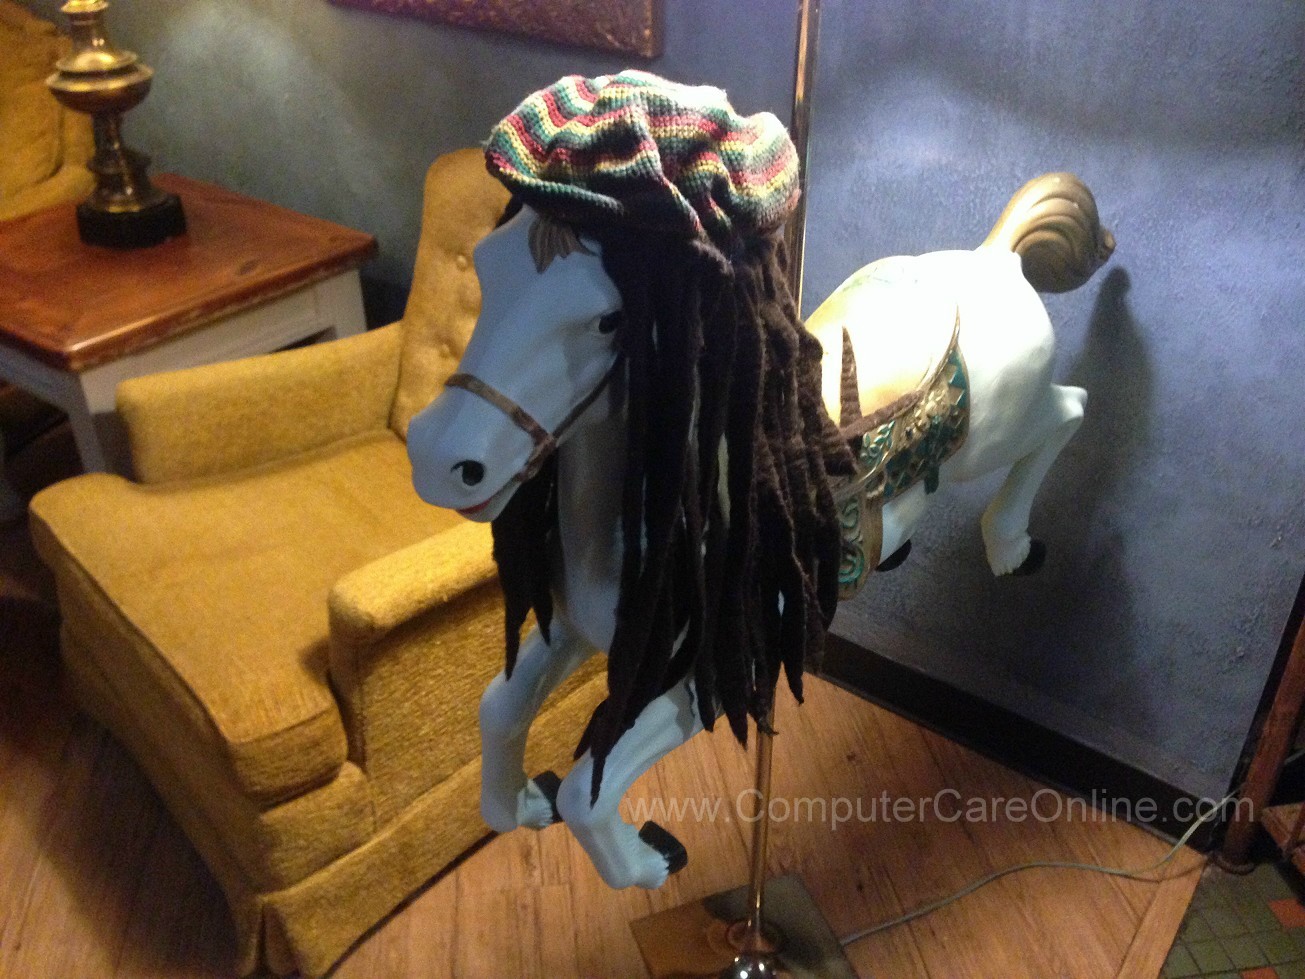 Just a carousel horse lamp wearing a dreadlocks wig, to brighten your day.